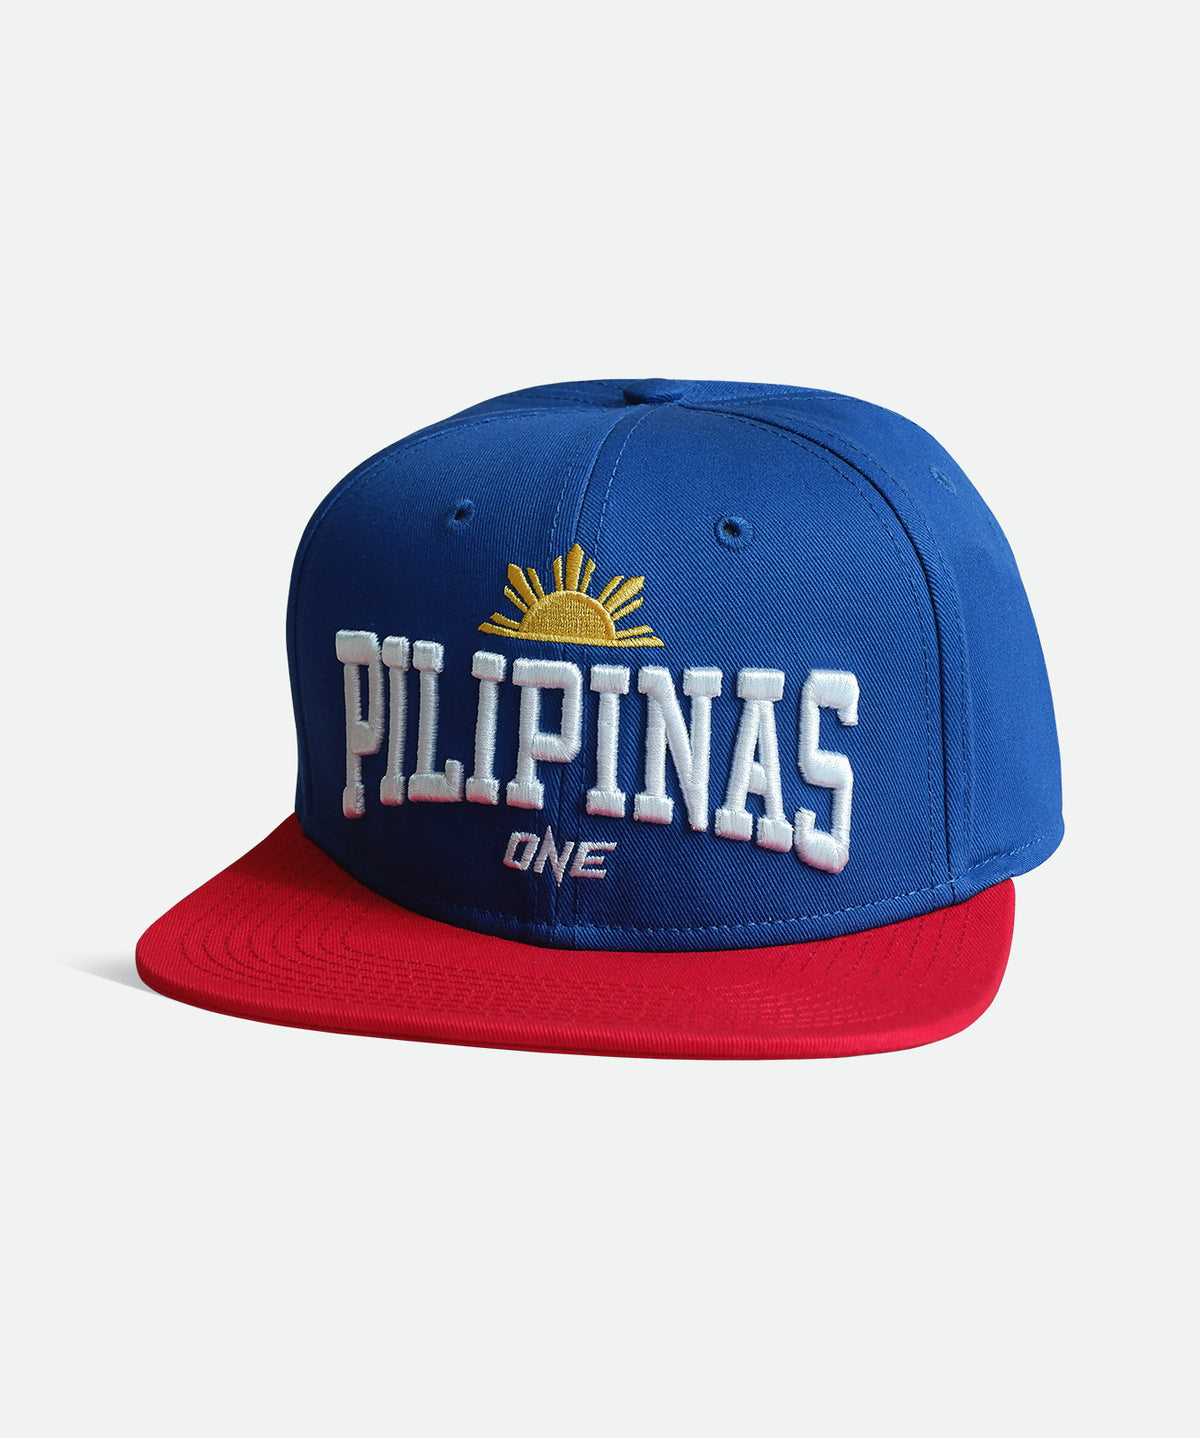 Pilipinas Snapback Cap - ONE.SHOP | The Official Online Shop of ONE Championship